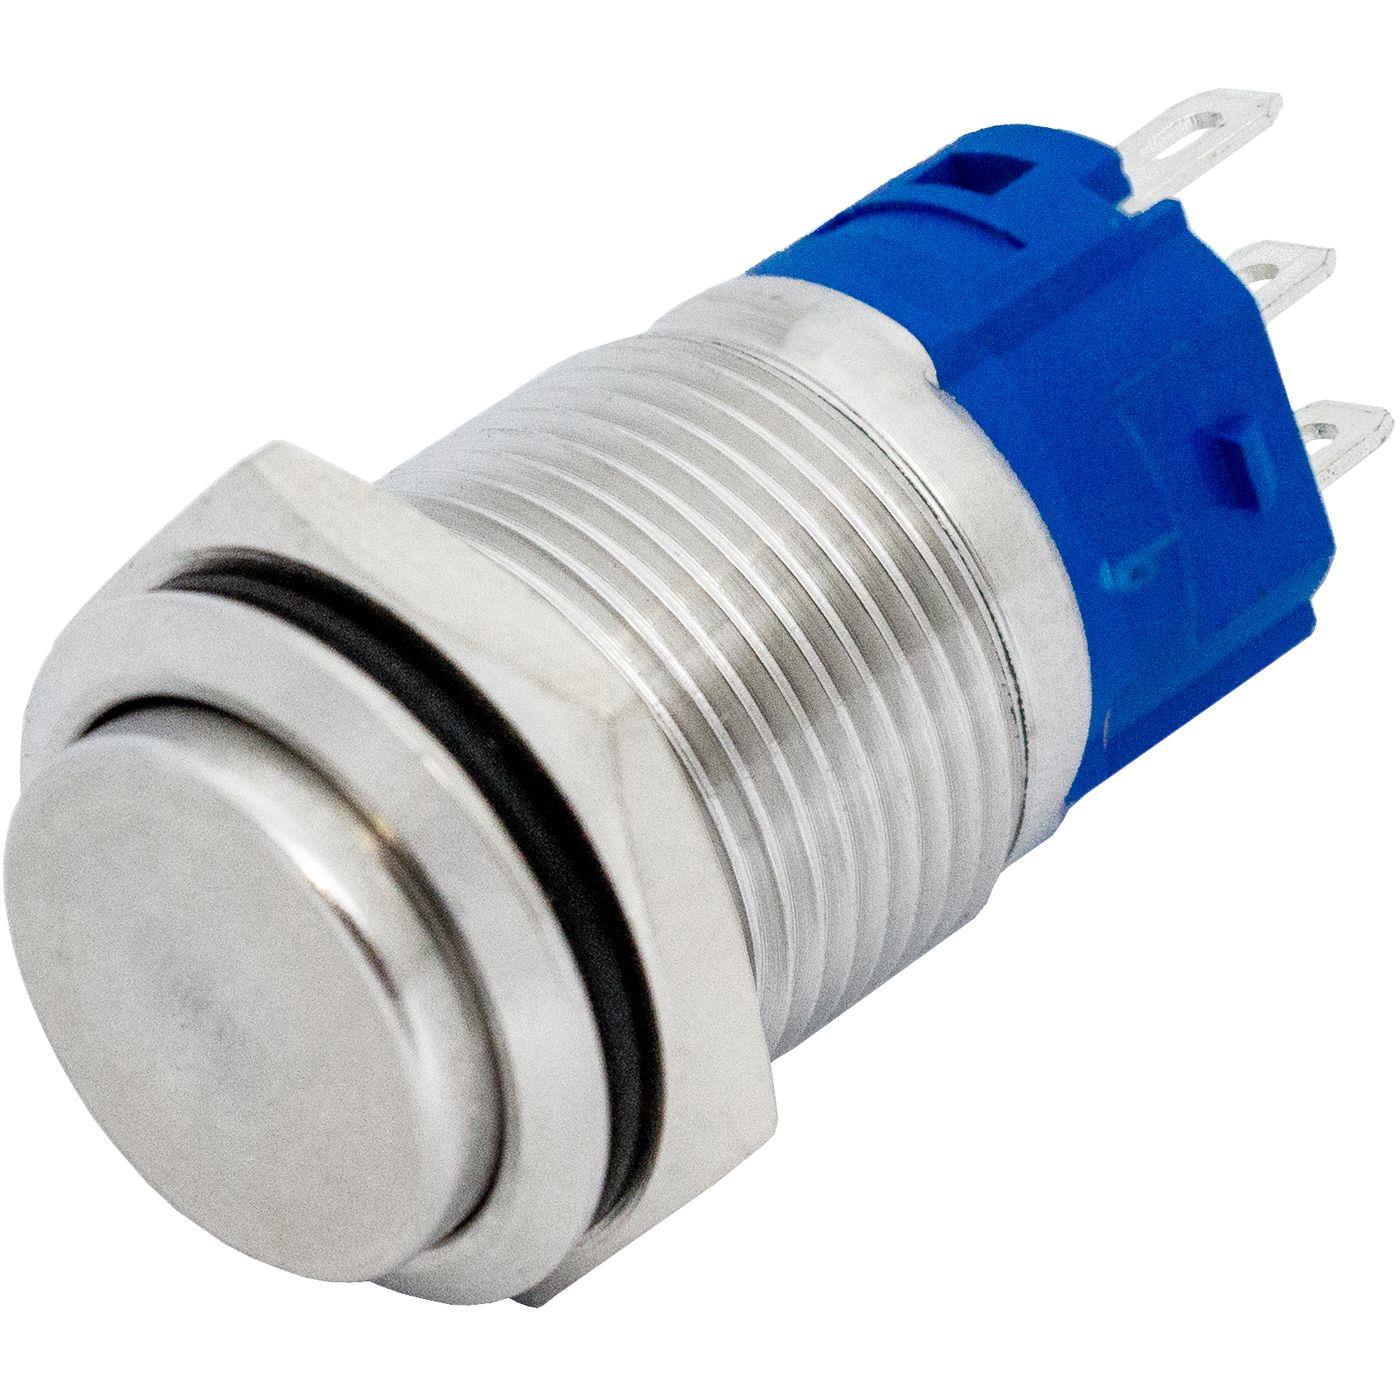 Stainless steel Pressure switch raised Ø16mm IP65 2,8x0,5mm Pins 250V 3A Vandal-proof